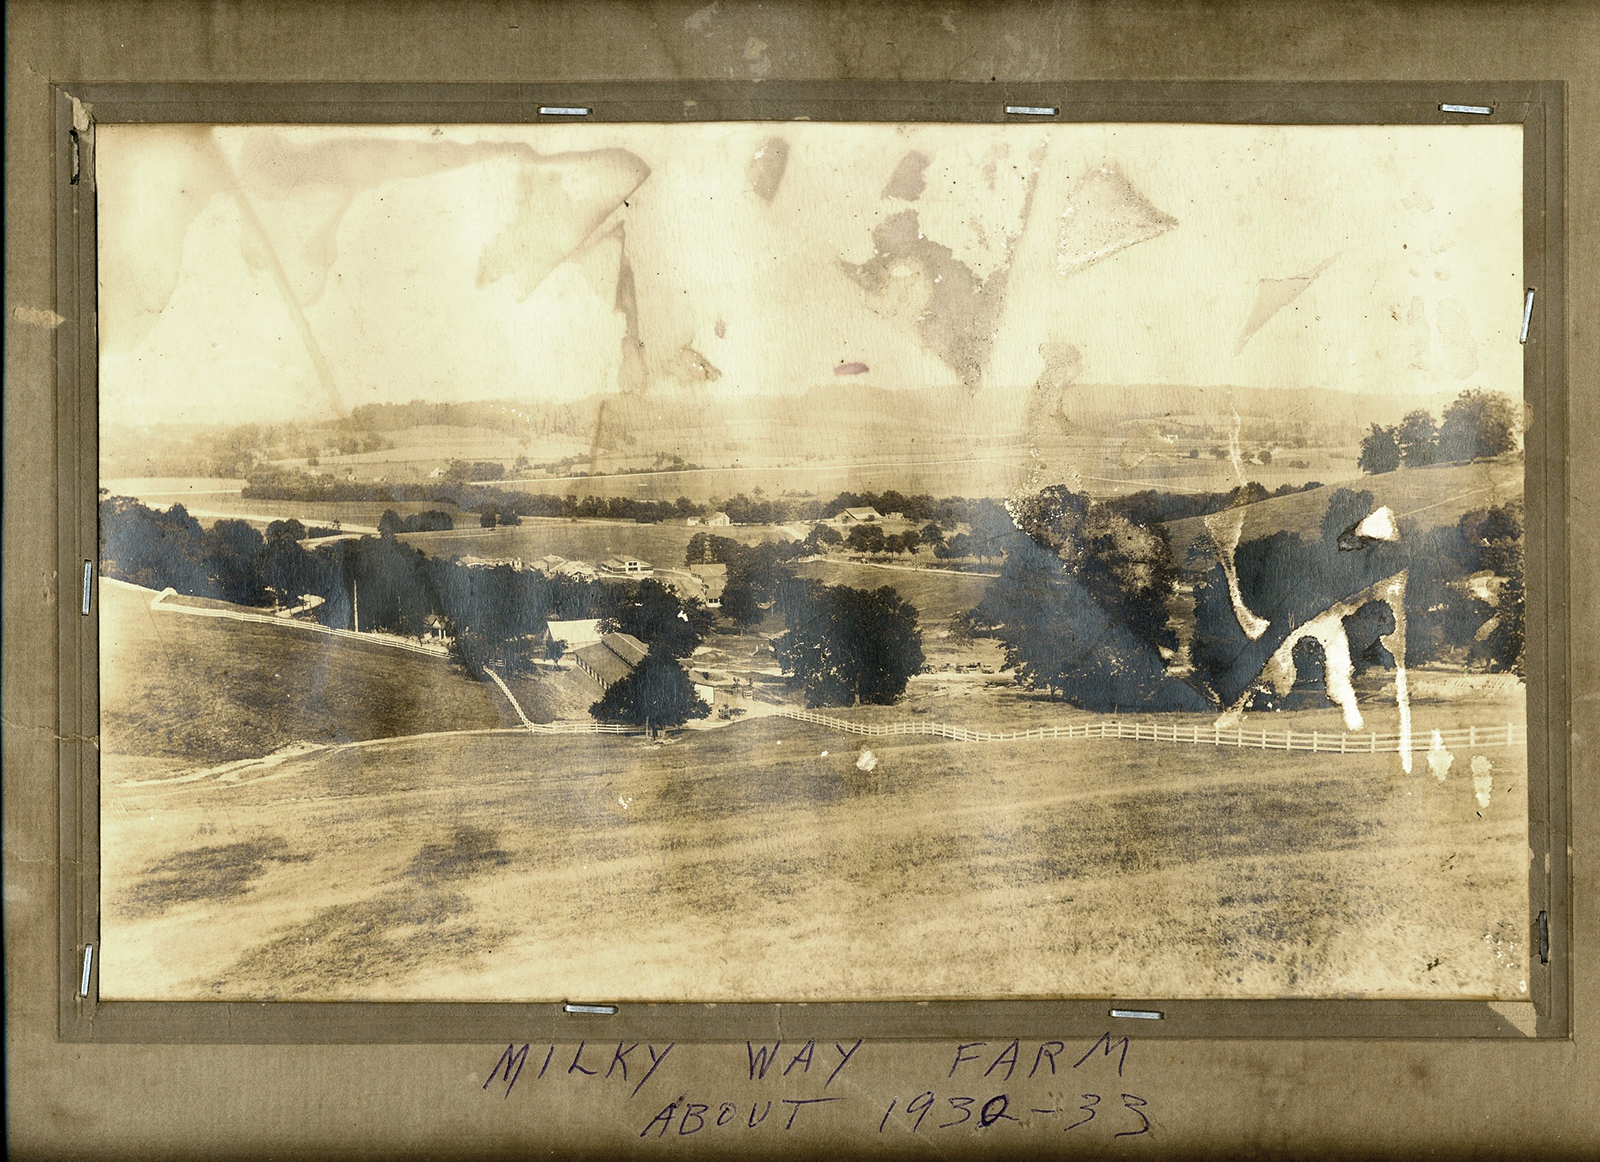 Aged black and white photograph of the Milky Way Farm from about 1930 to 1933.